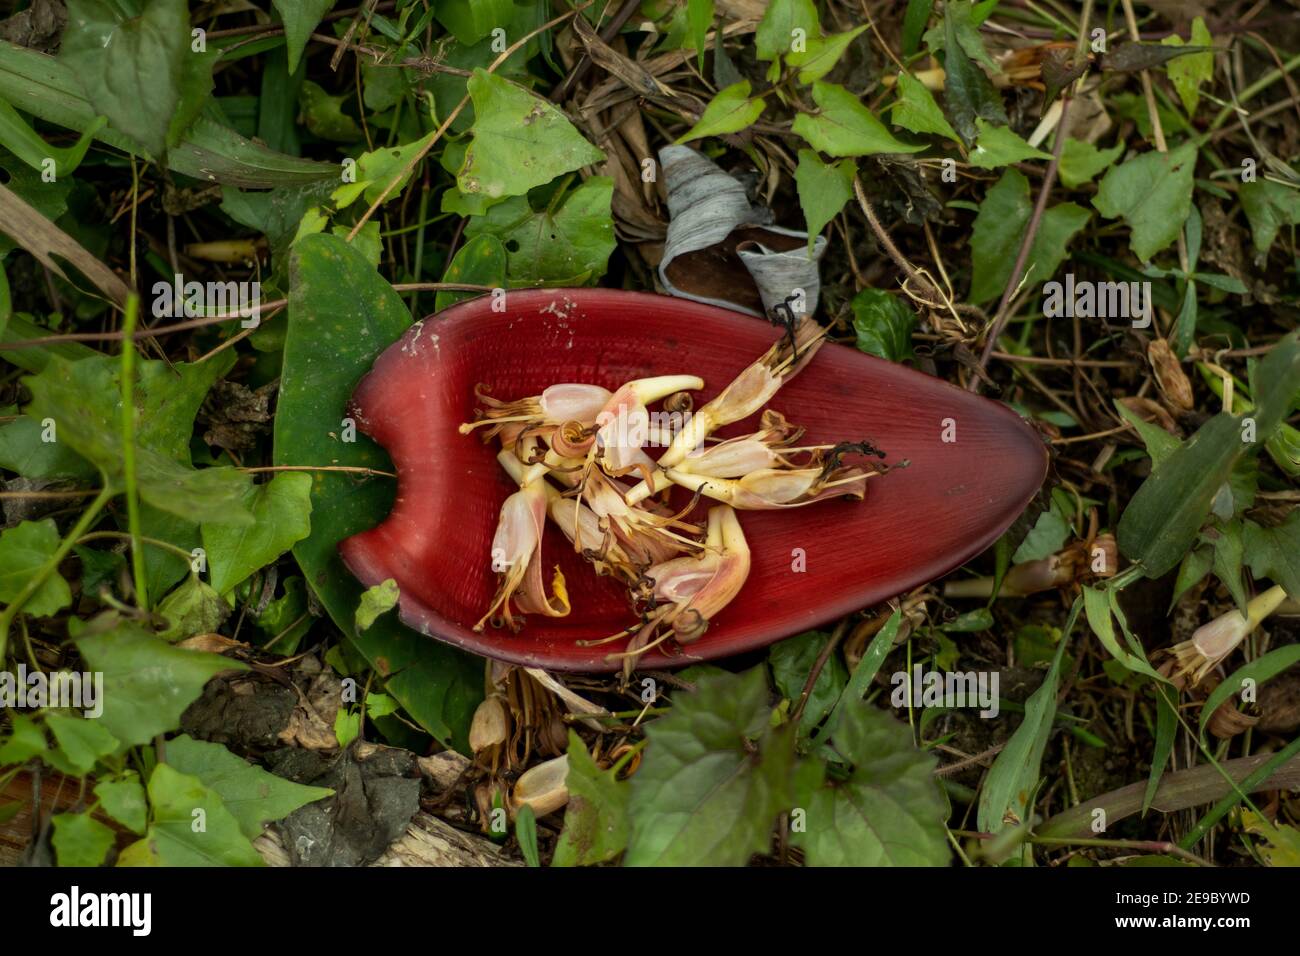 Many petals fall on the petals of a banana flower in the grass Stock Photo